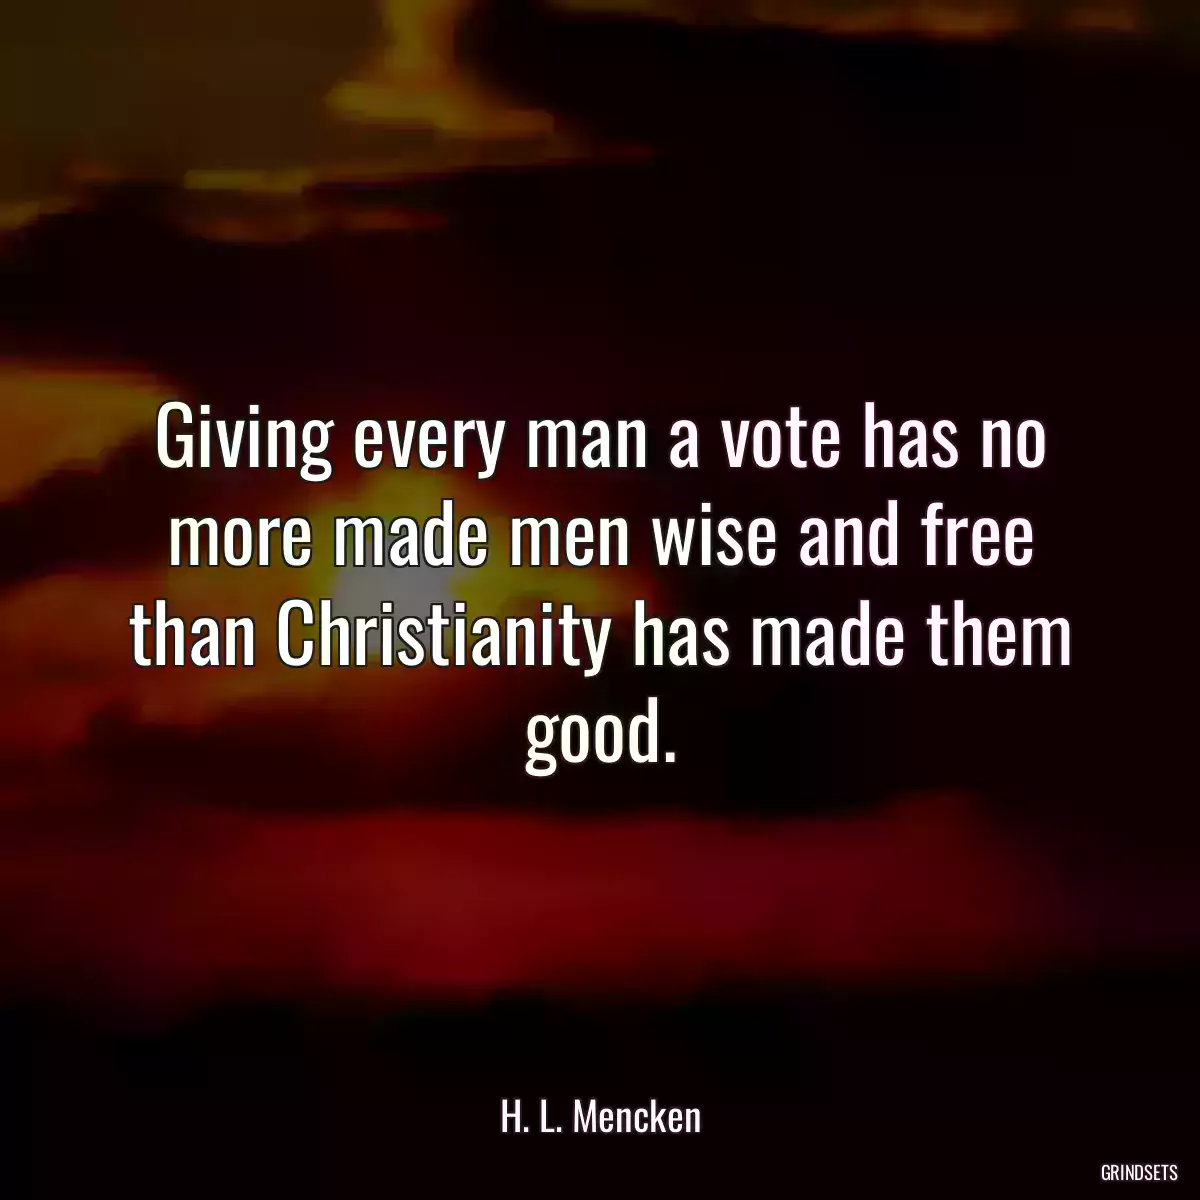 Giving every man a vote has no more made men wise and free than Christianity has made them good.